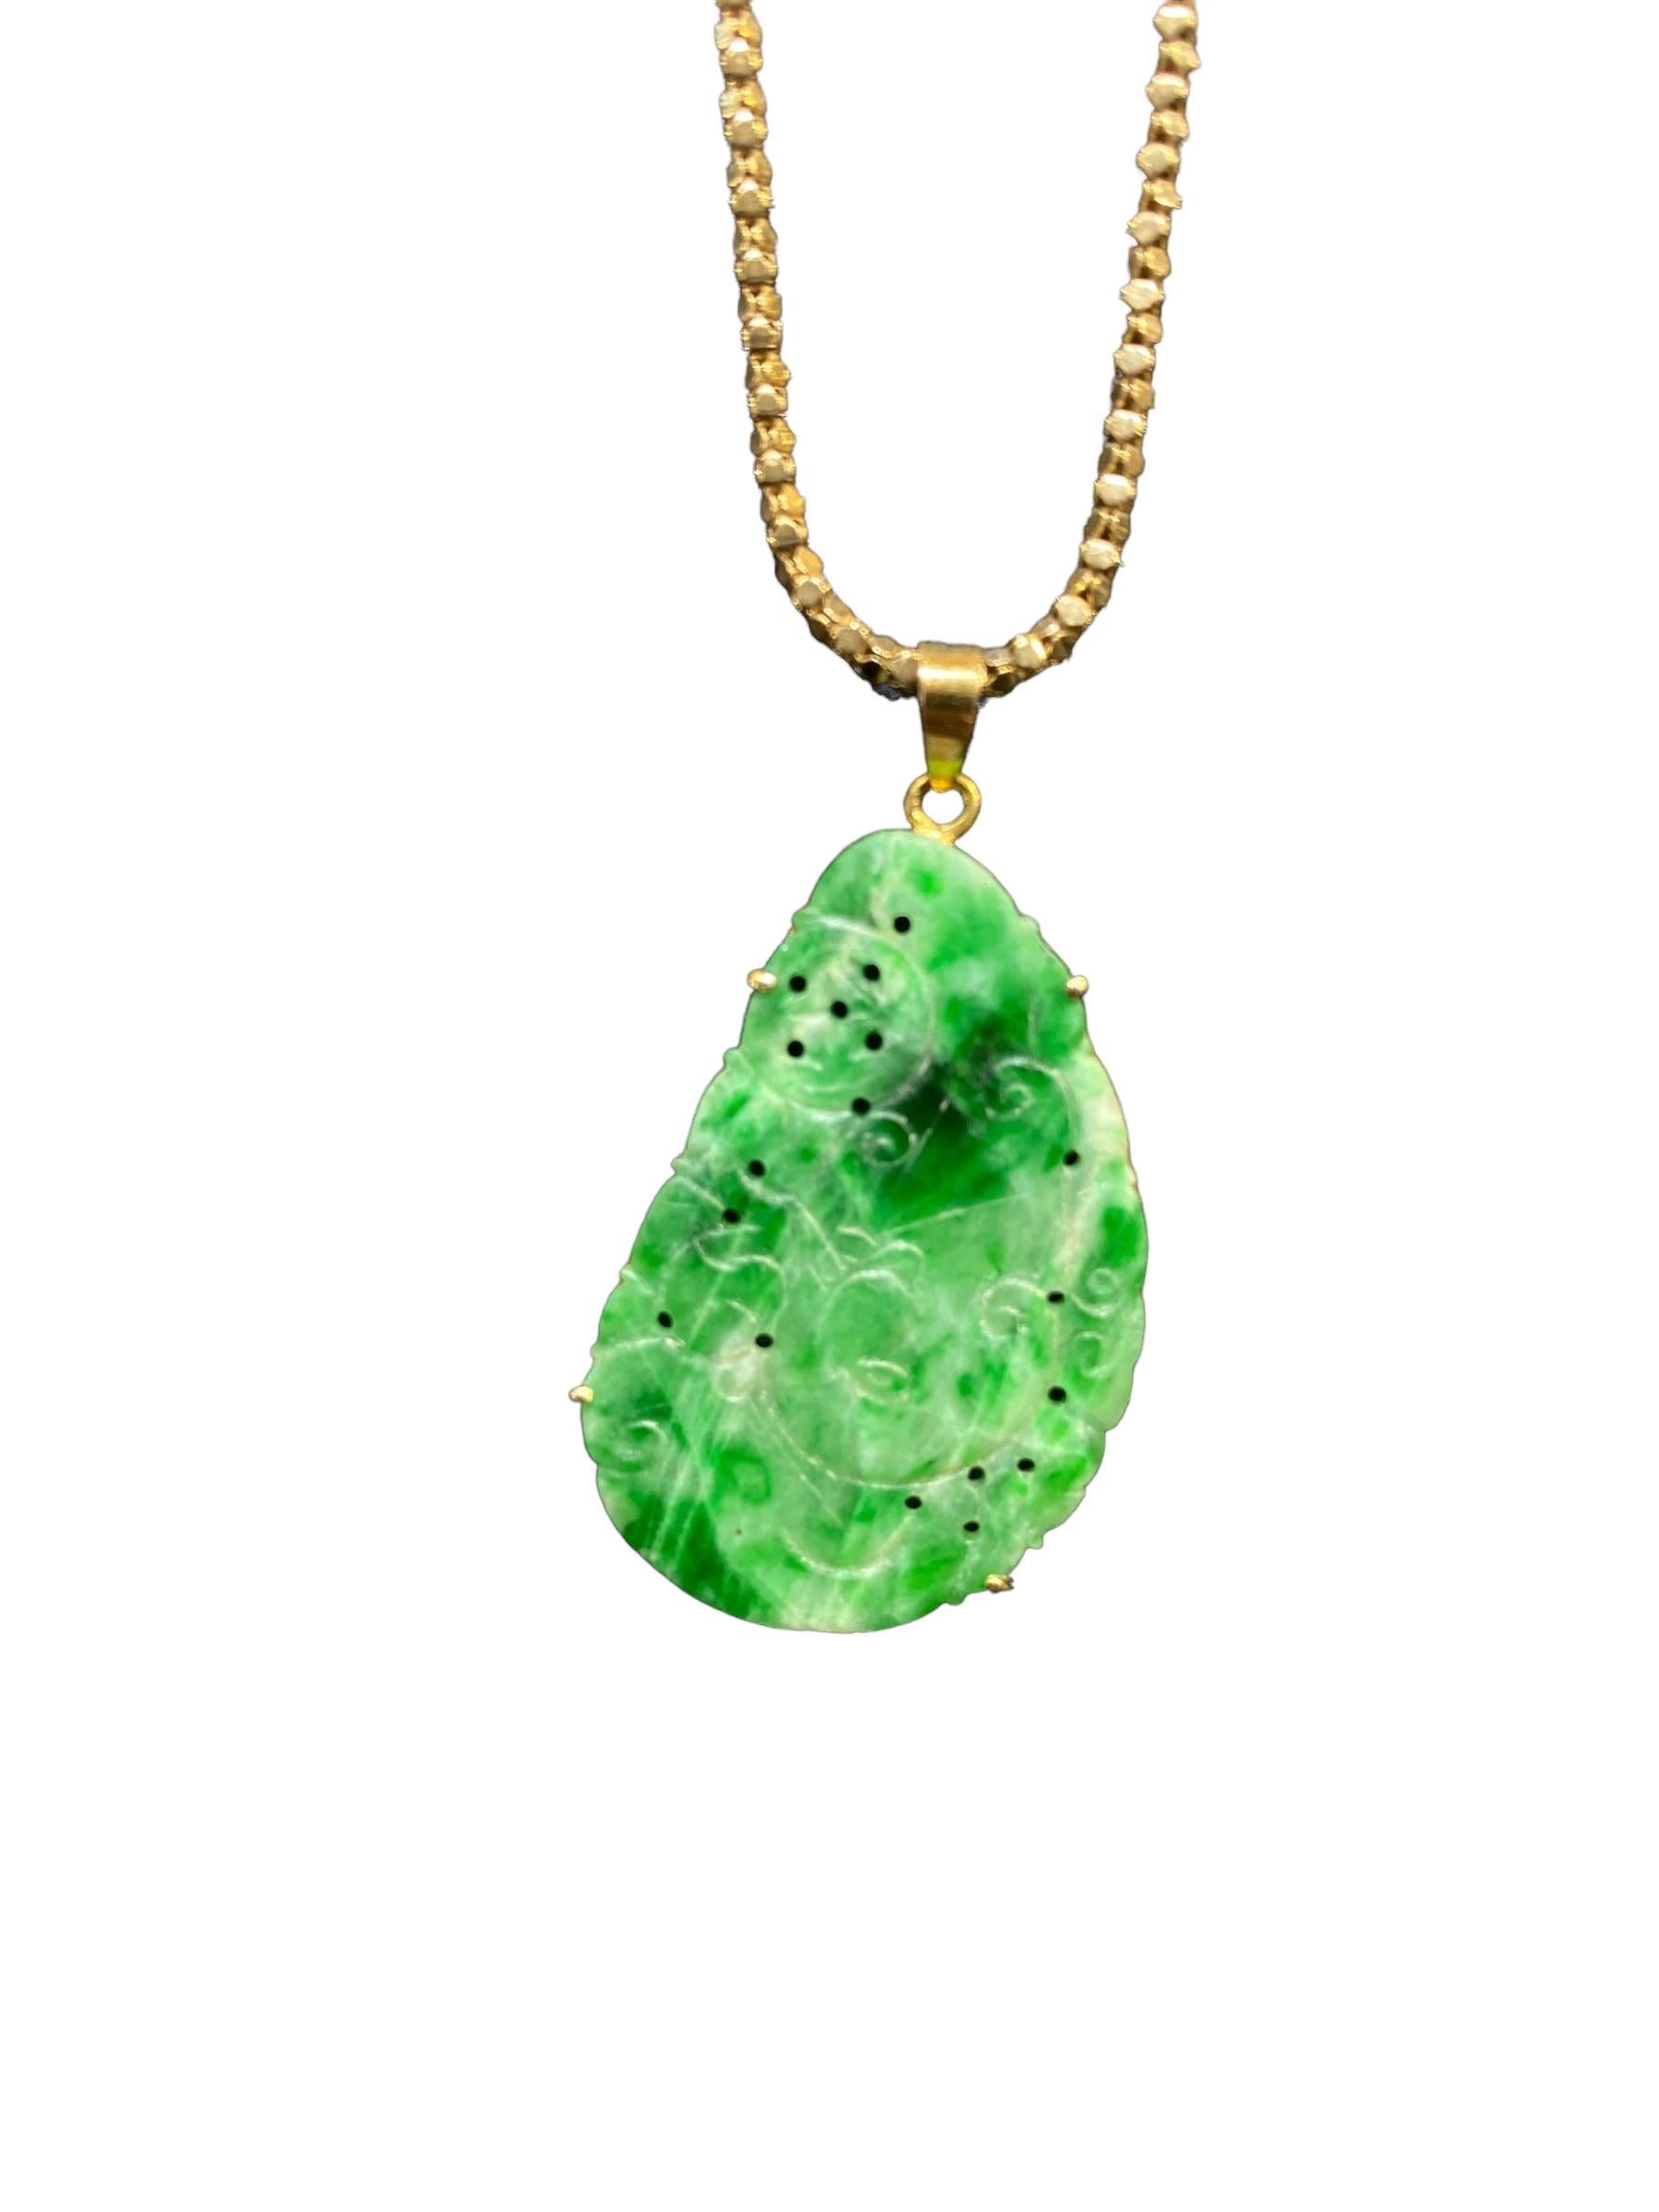 Jadeite Carved Pendant 14K Yellow Gold
The pendant is a beautifully carved jade. The jade is translucent and colored with deep green veins. The carving depicts a star formation, swirls & movement, giving a feeling of peace and tranquility. The jade